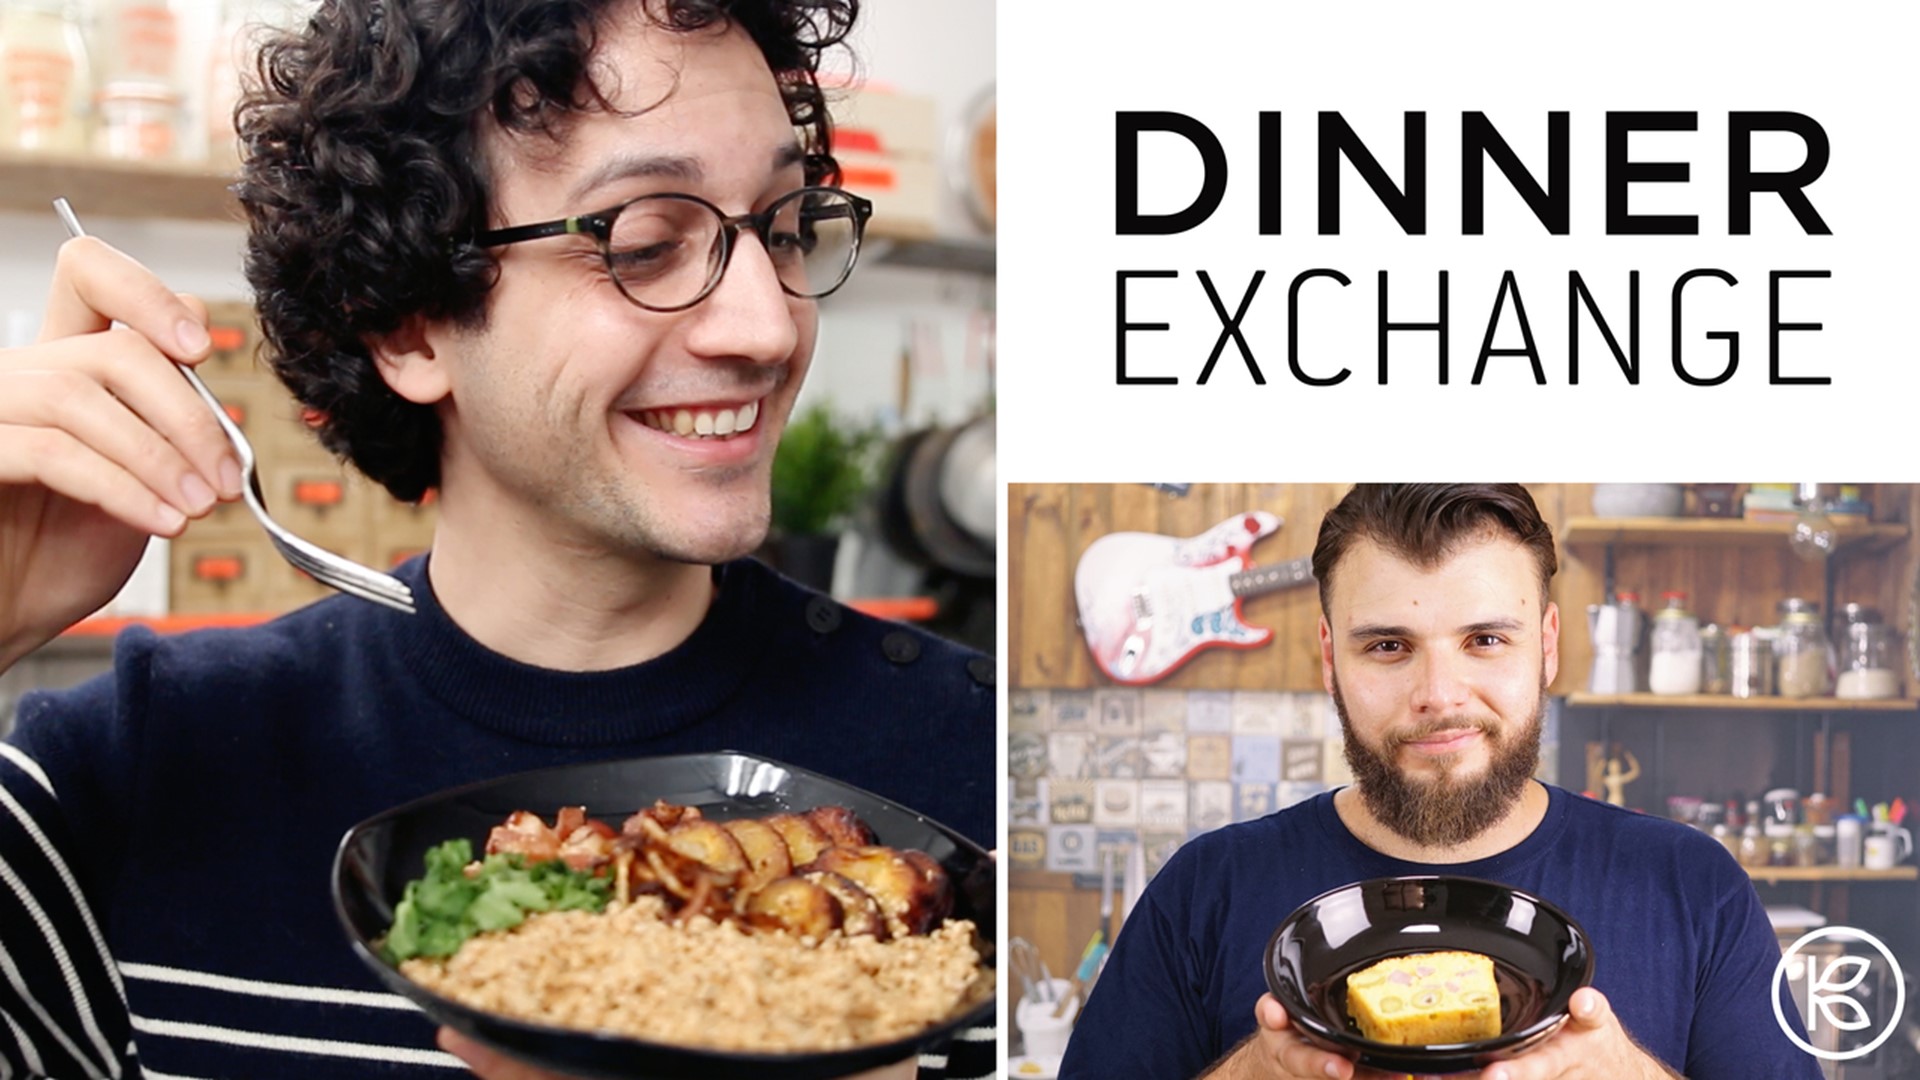 How cooking sparked a bromance between two strangers who live in different countries. Watch Alex French Guy Cooking and Rafael exchange their favorite recipes, stories, and witness the power of good food and the internet!